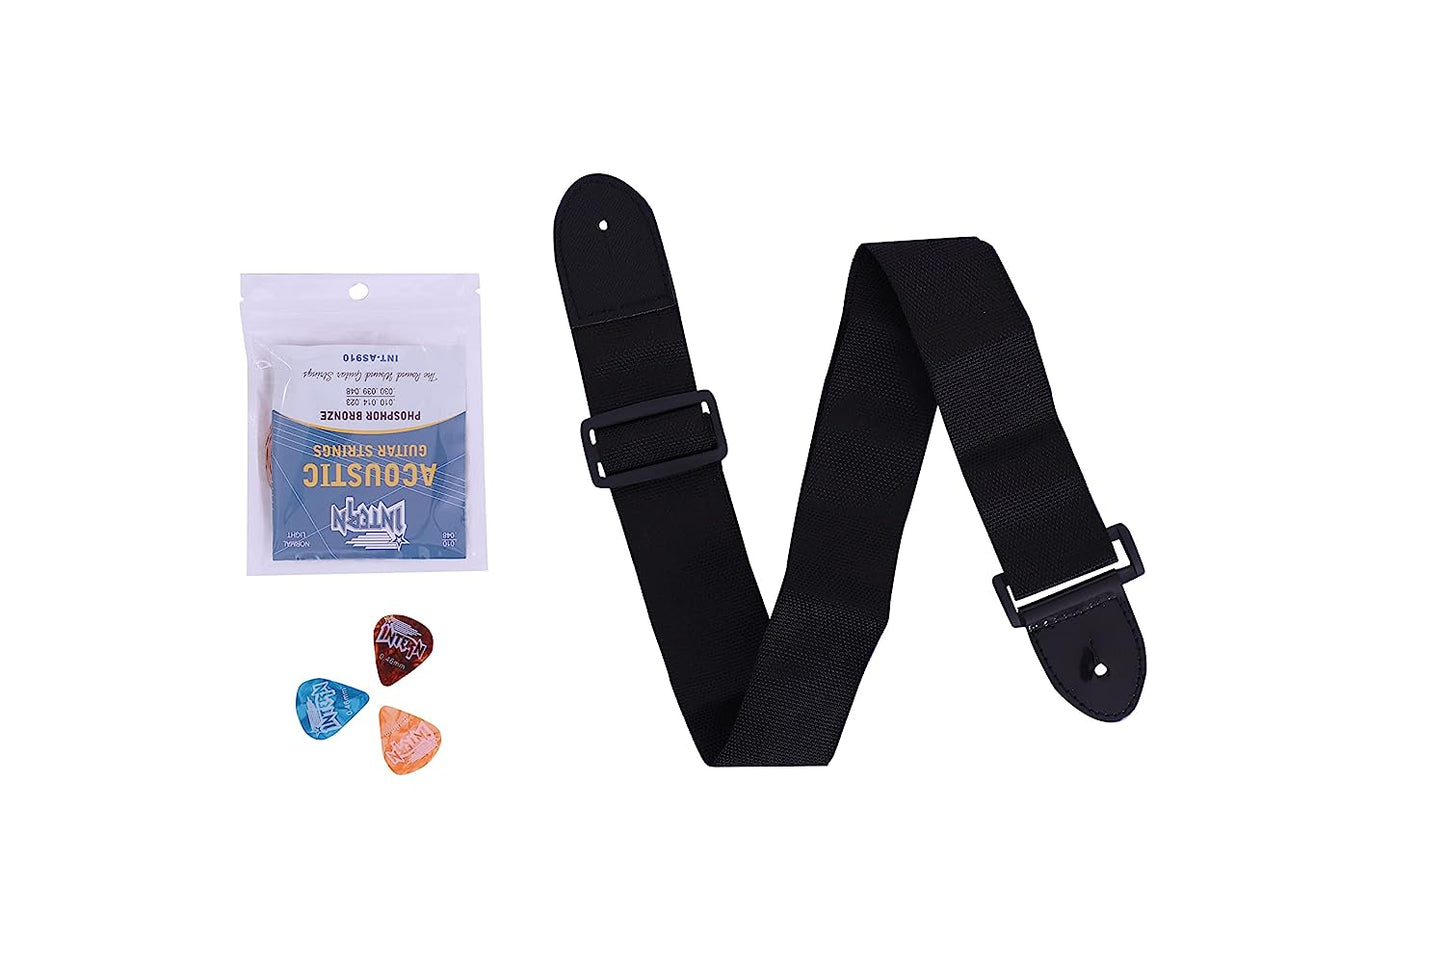 INTERN 40 inches Acoustic Guitar with Pick-up & truss rod, carry bag, strings pack, strap & picks. Premium Wooden durable built, Best tonal stability with professional sound amplificaiton. (Natural).